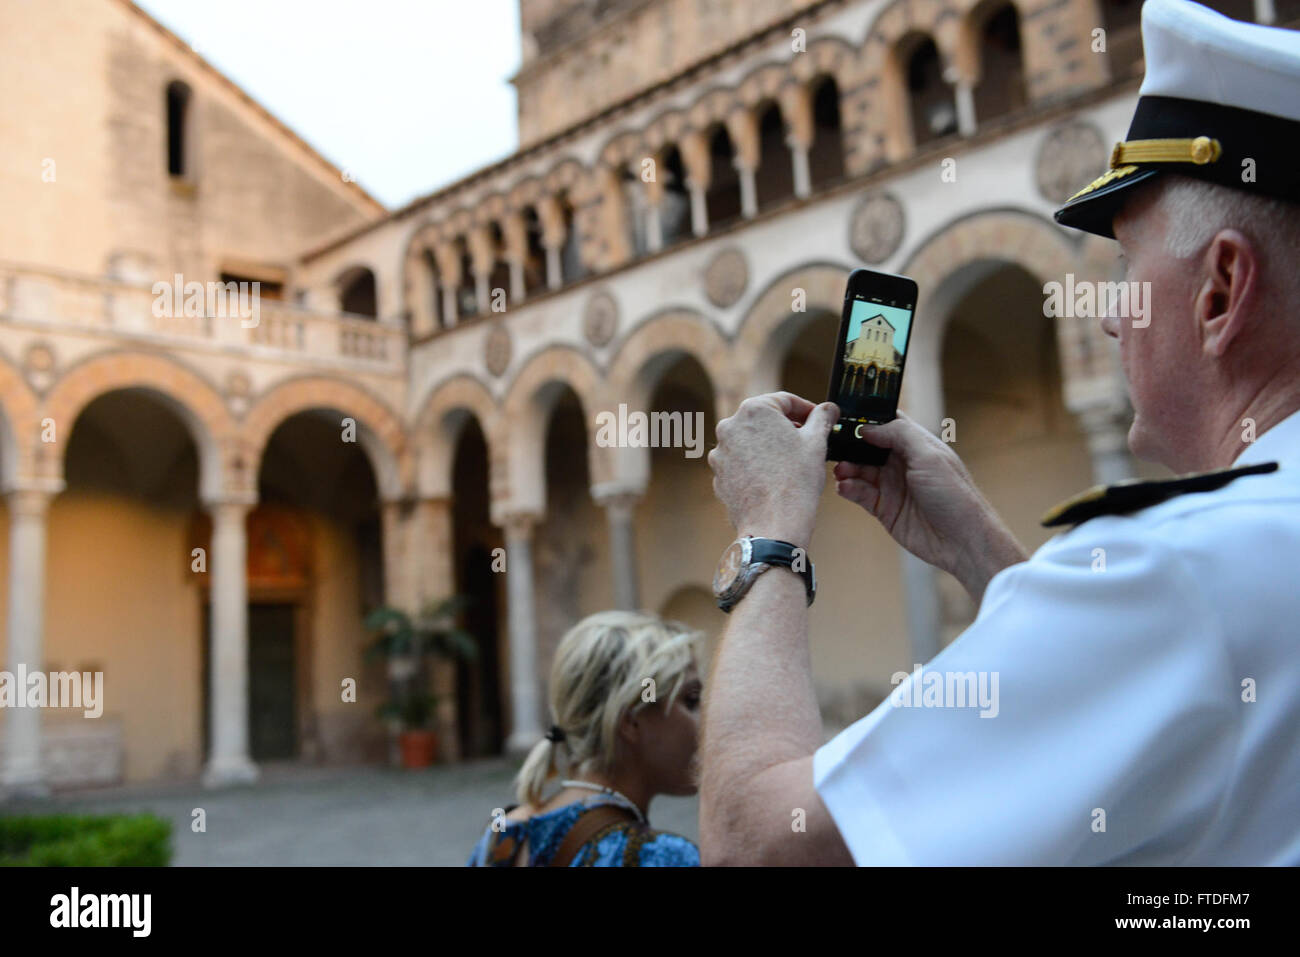 150909-N-SS492-134 SALERNO, Italy (Sept. 9, 2015) Commander, U.S. 6th Fleet, Vice Adm. James G. Foggo III takes a photo of St. Matthew’s Cathedral during a visit Sept. 9, 2015. Foggo visited the town to commemorate the anniversary of the liberation of Salerno and attend a nearby concert by the U. S. Naval Forces Europe Band. (U.S. Navy photo by Chief Mass Communication Specialist (select) Brian P. Biller/Released) Stock Photo